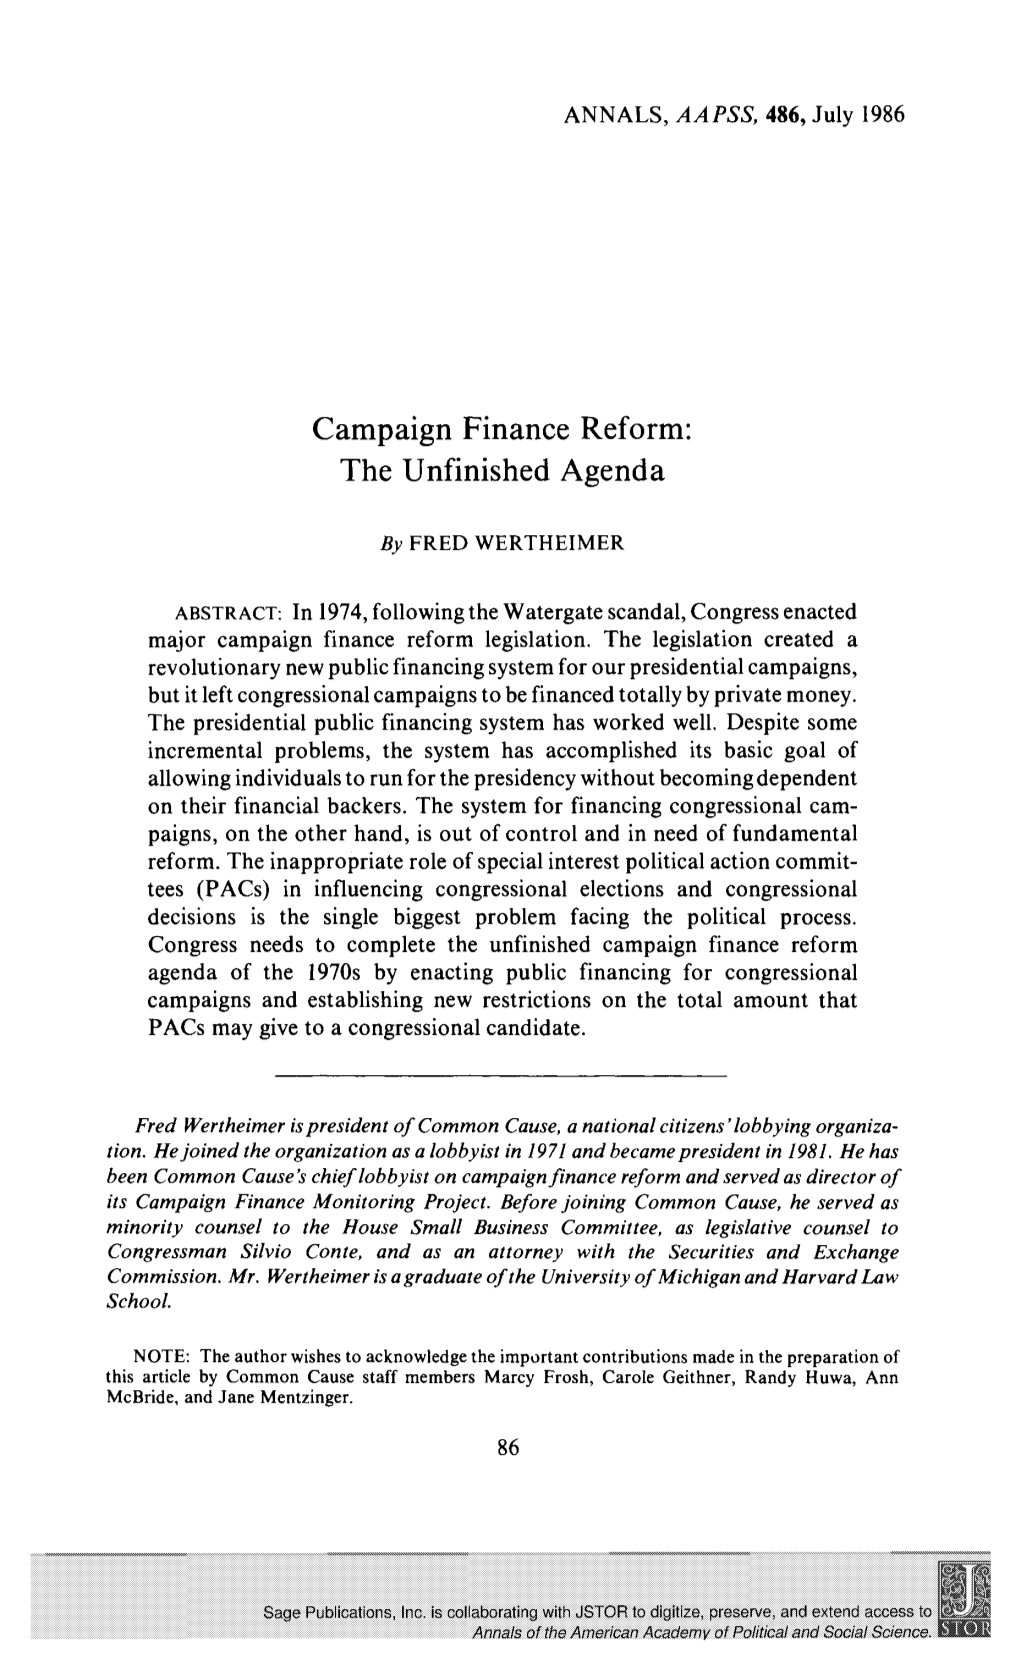 Campaign Finance Reform: the Unfinished Agenda